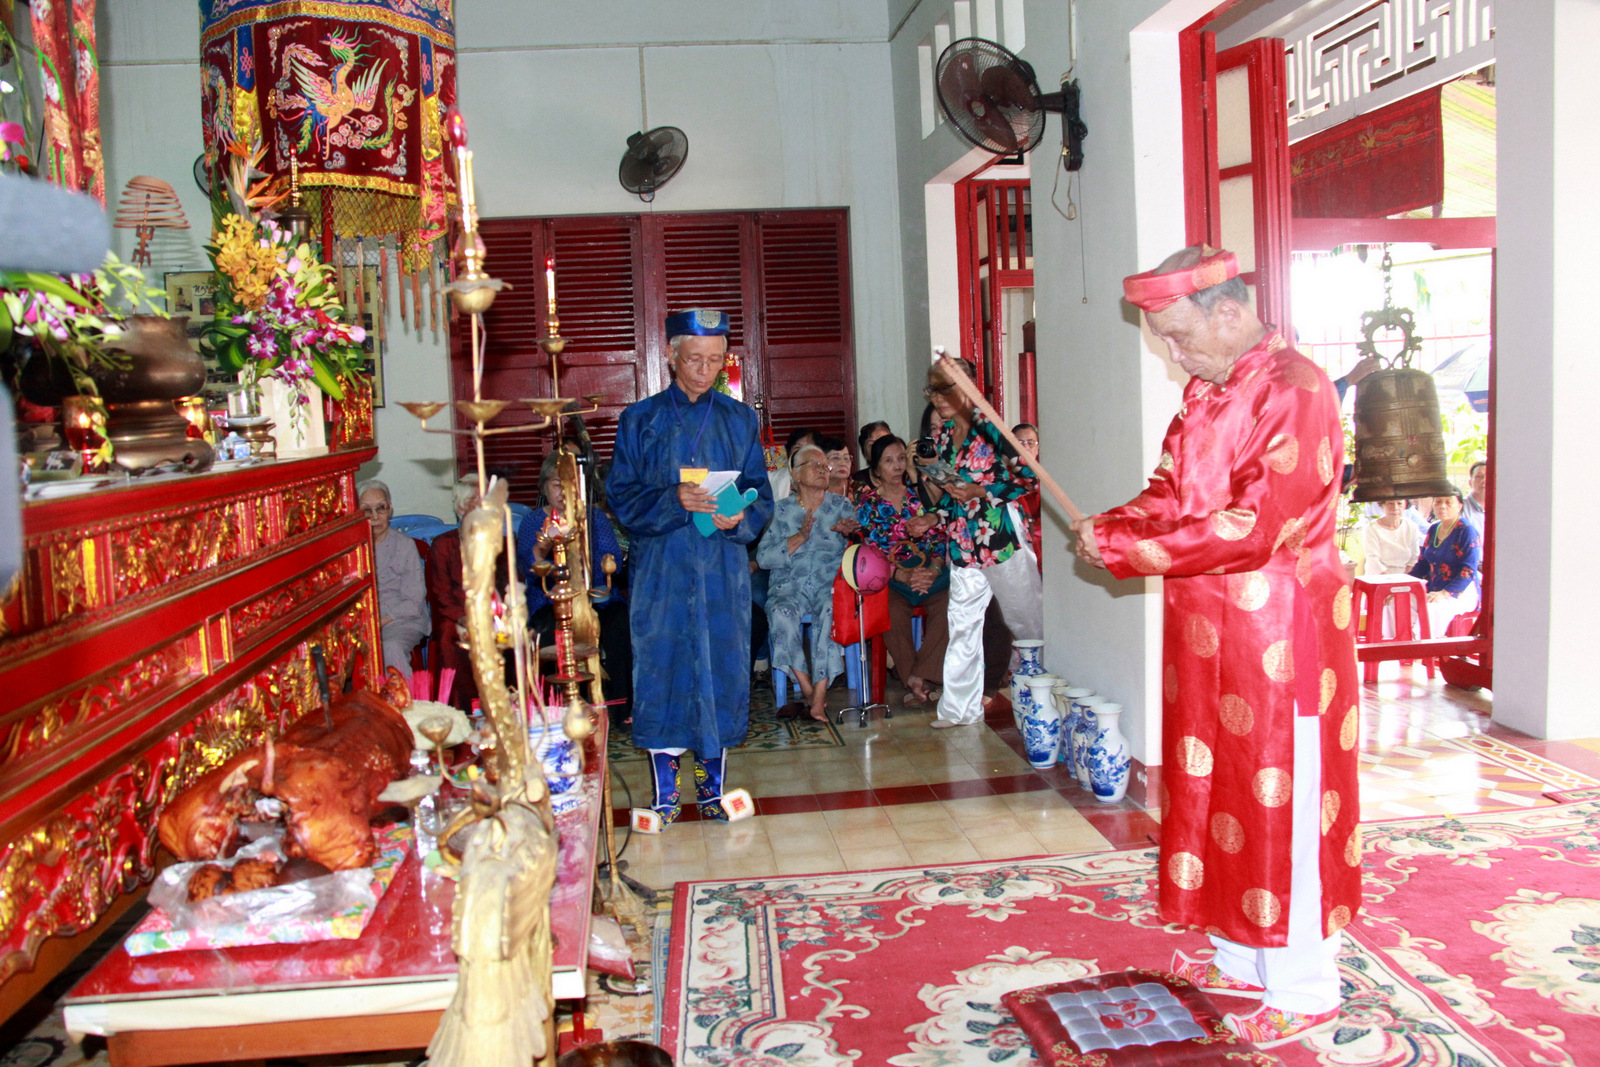 Dam Quang Hat, Head of management committee of Tran Hung Dao Temple in Nha Trang City, burns incense to open the ceremony.